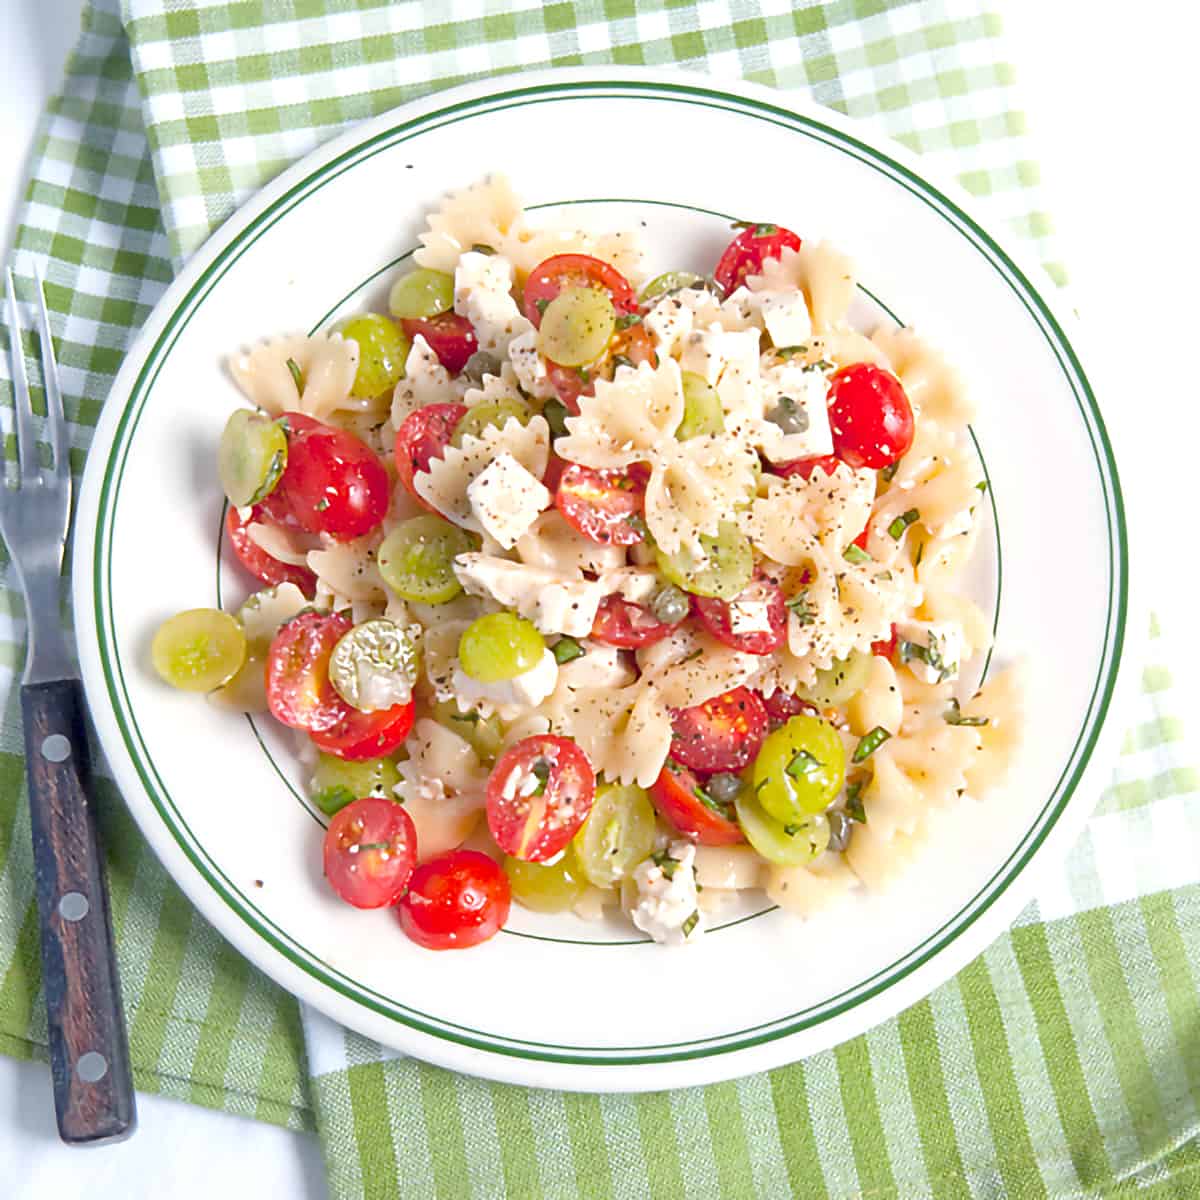 Bowtie Pasta Salad with Grapes